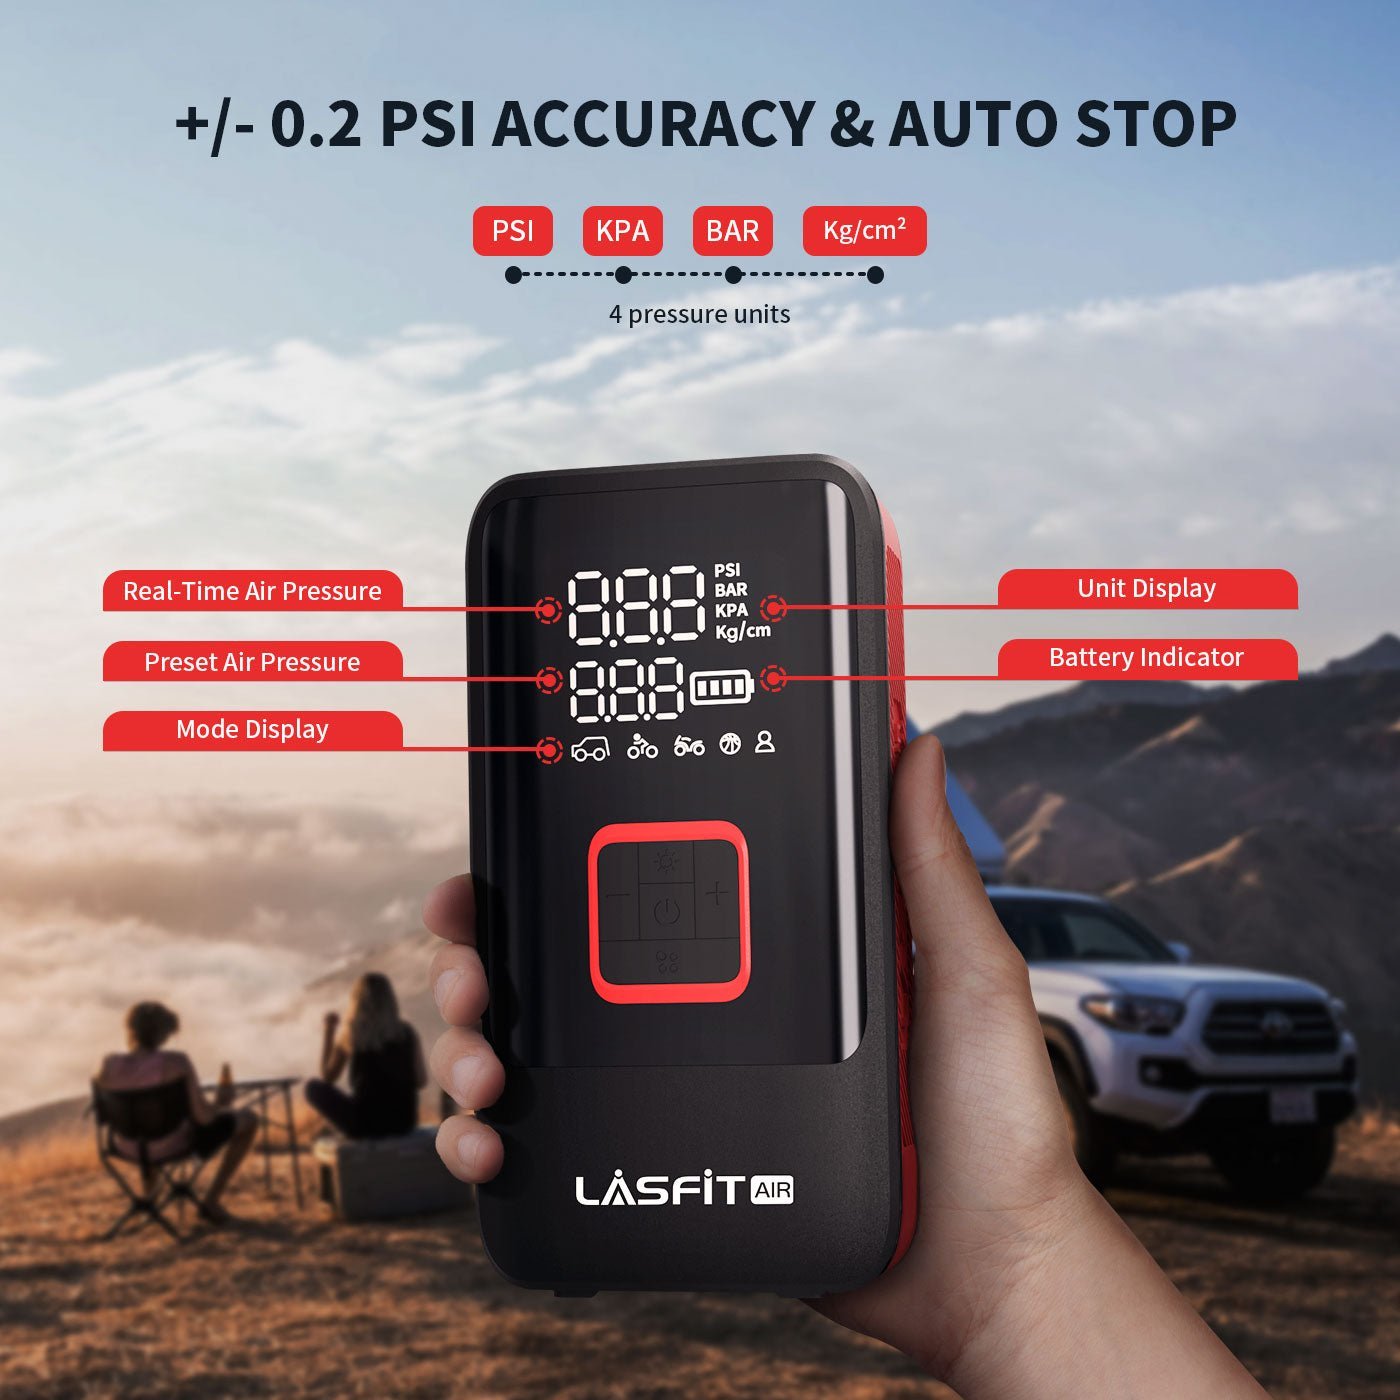 LASFIT AIR AirMaster Smart Dual-Pump Tire Inflator, Portable and Powerful Car Air Compressor with Dual Cylinder Tech